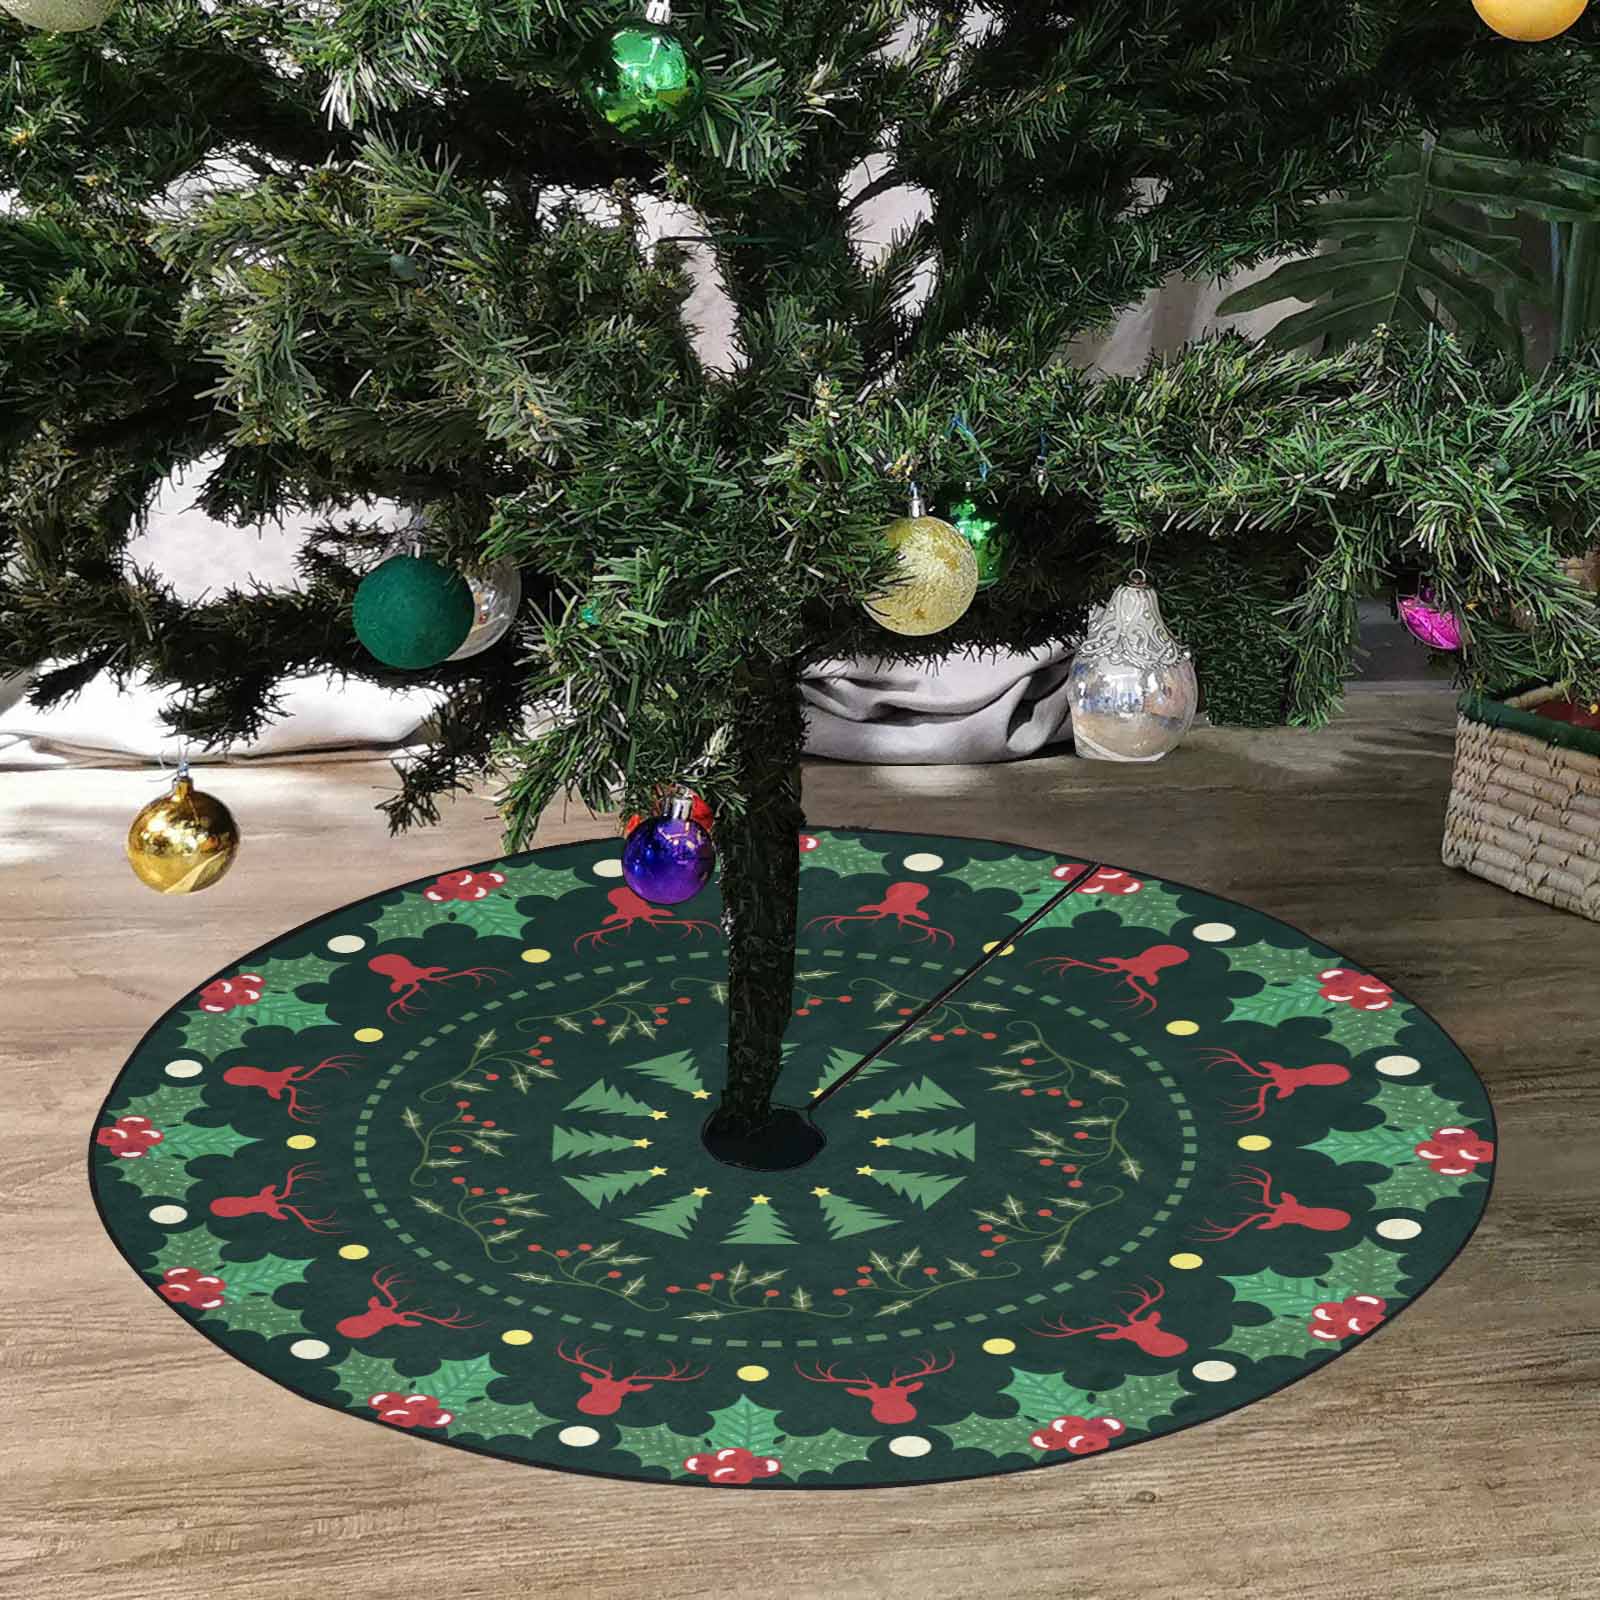 A circle Christmas tree skirt print Deer head images and mistletoe leaves image on a green color background is wonderful Christmas gifts for your Papa